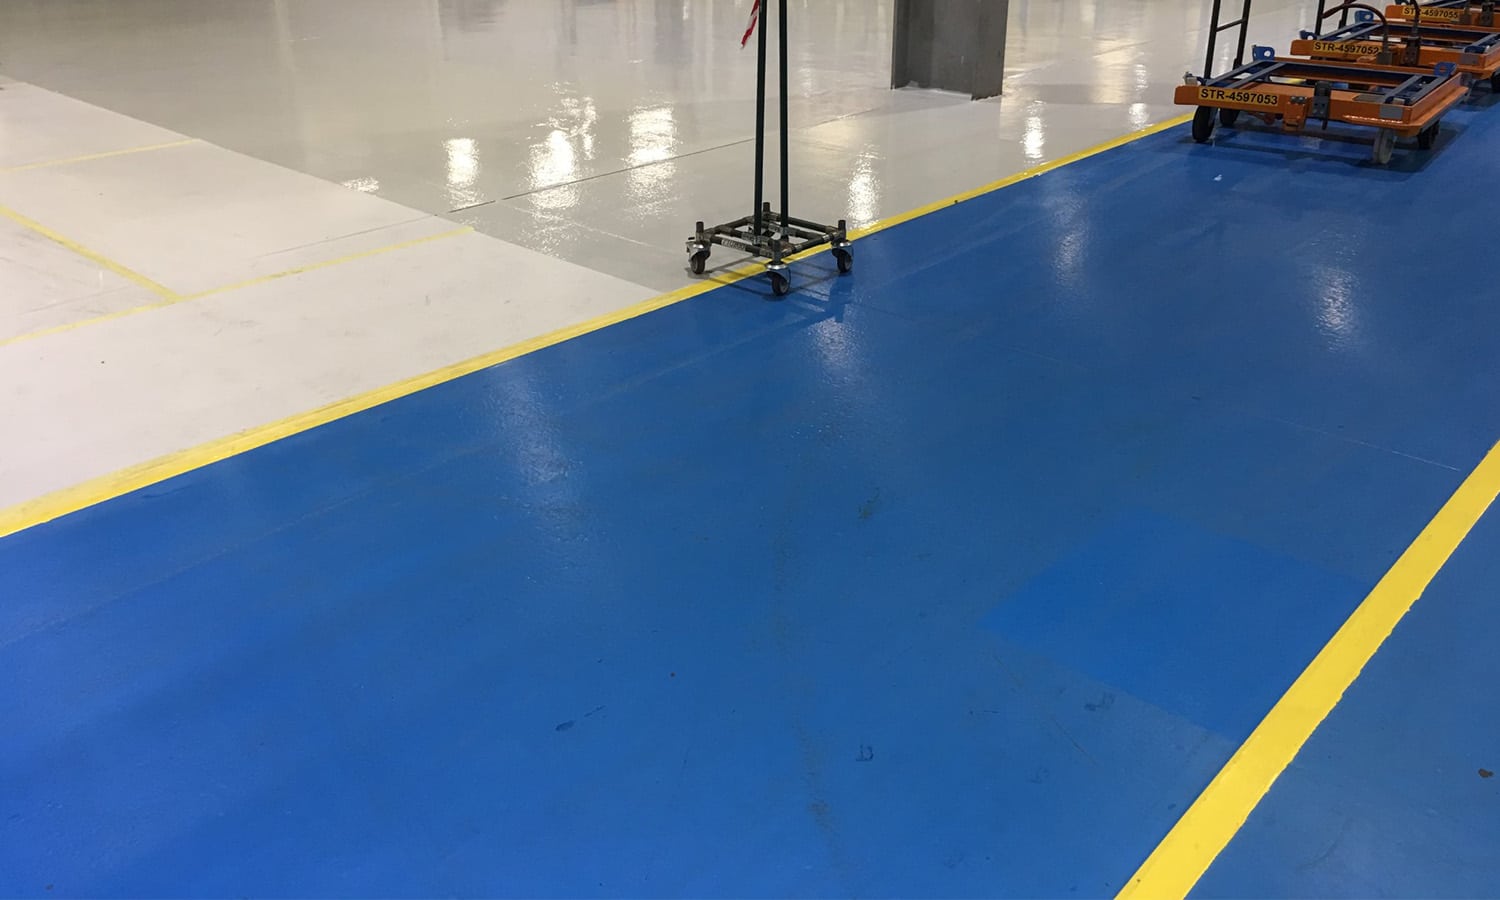 This image shows a factory floor with blue and yellow epoxy floor.